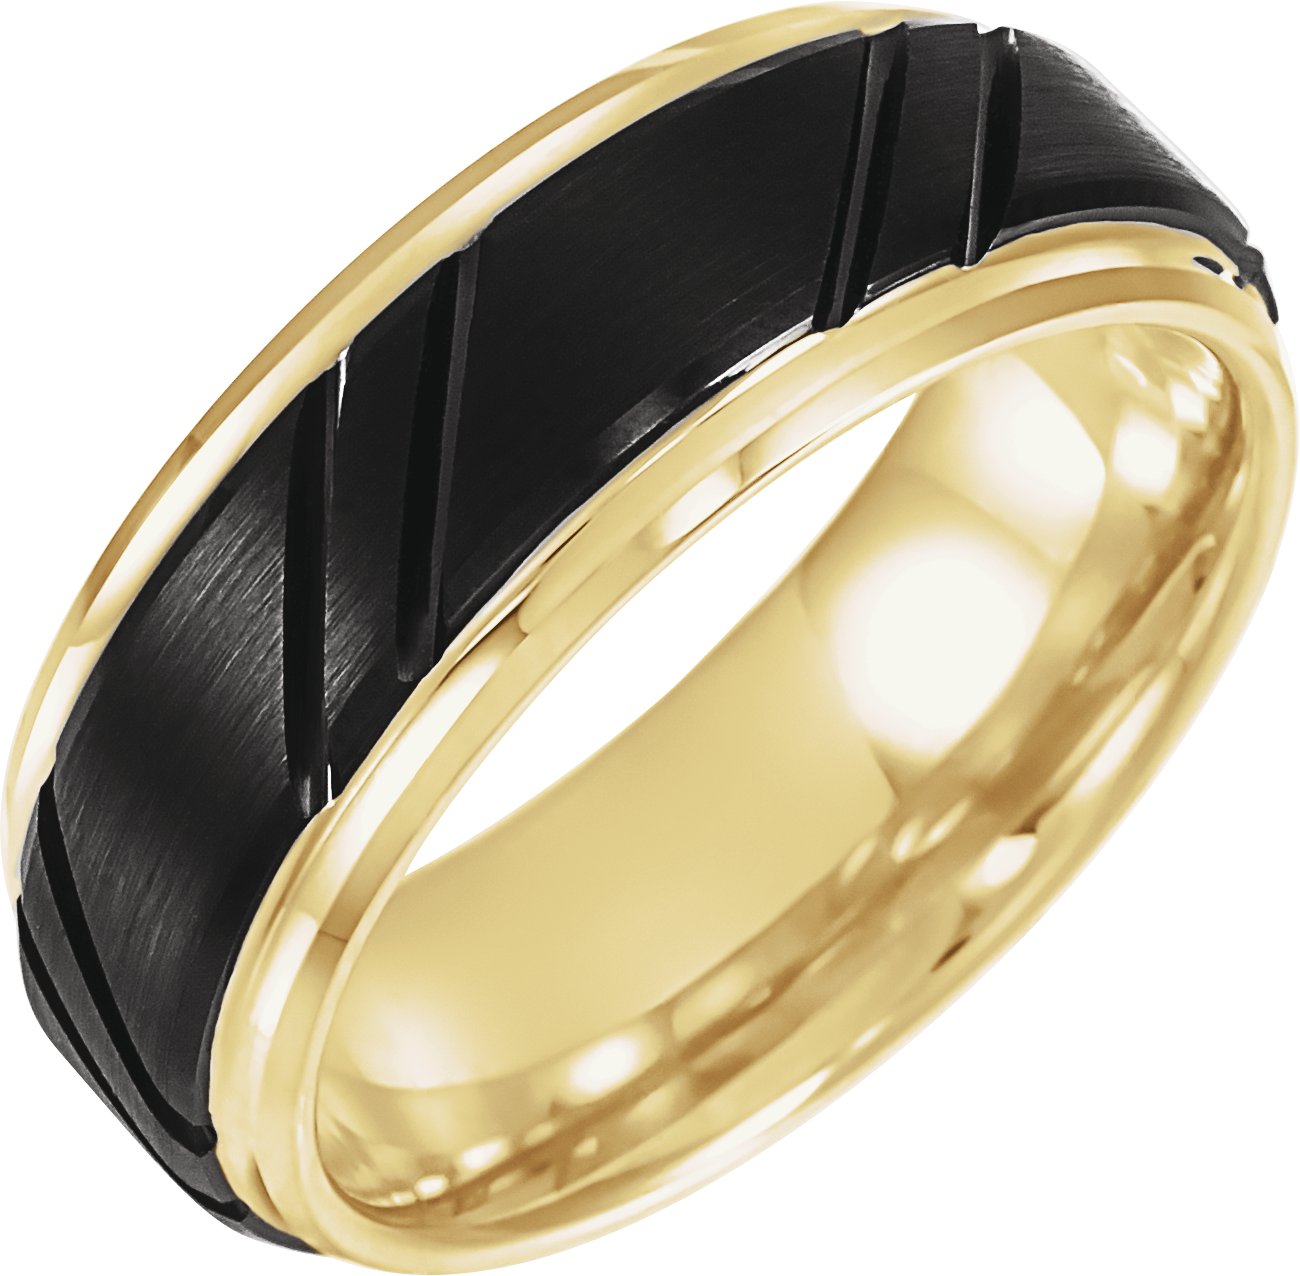 18K Yellow Gold-Plated & Black PVD Tungsten 8 mm Grooved Band Size 10